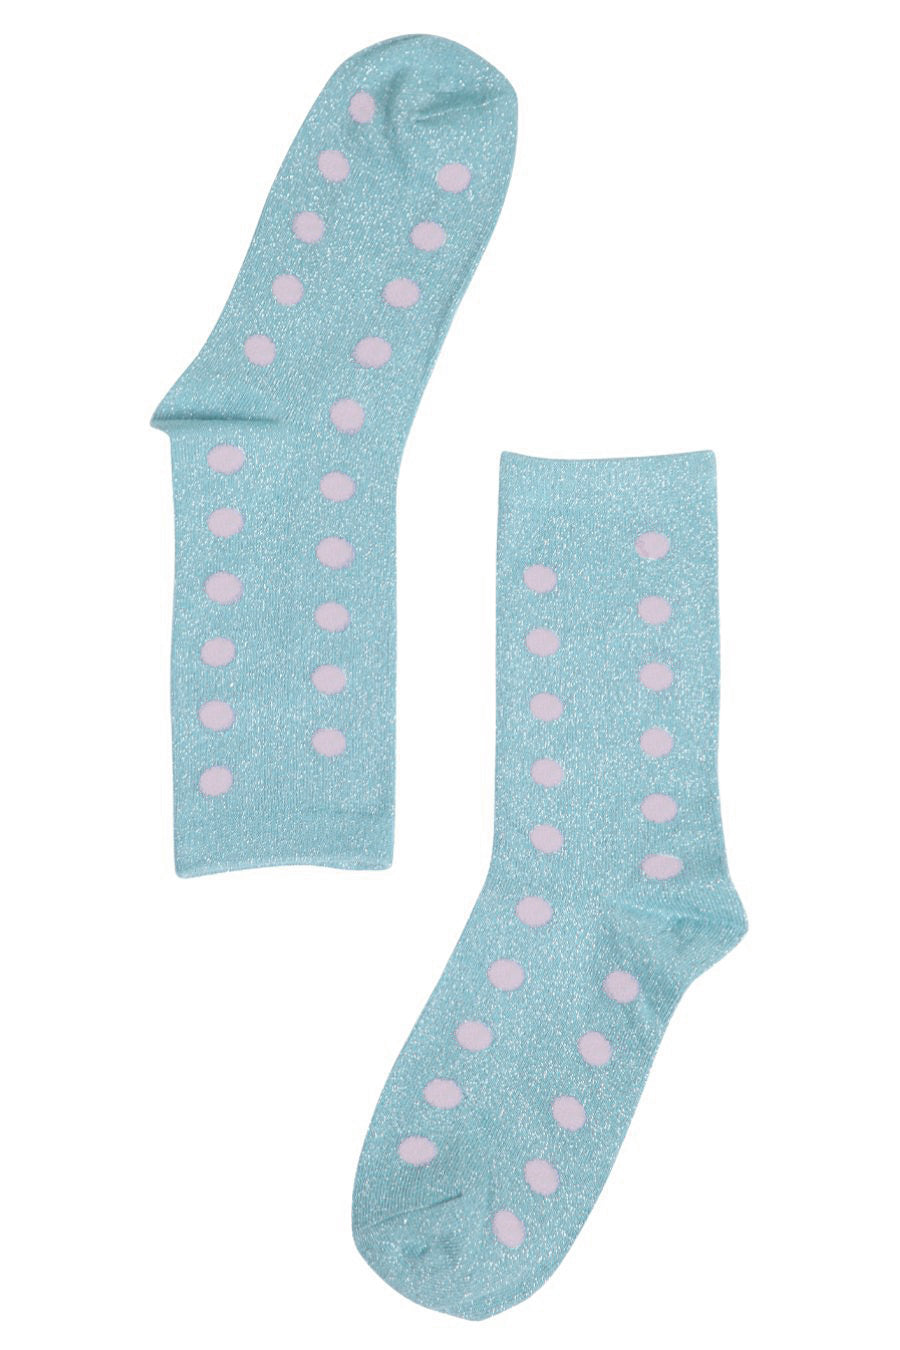 duck egg blue and pink polka dot ankle socks with an all over silver glitter sparkle